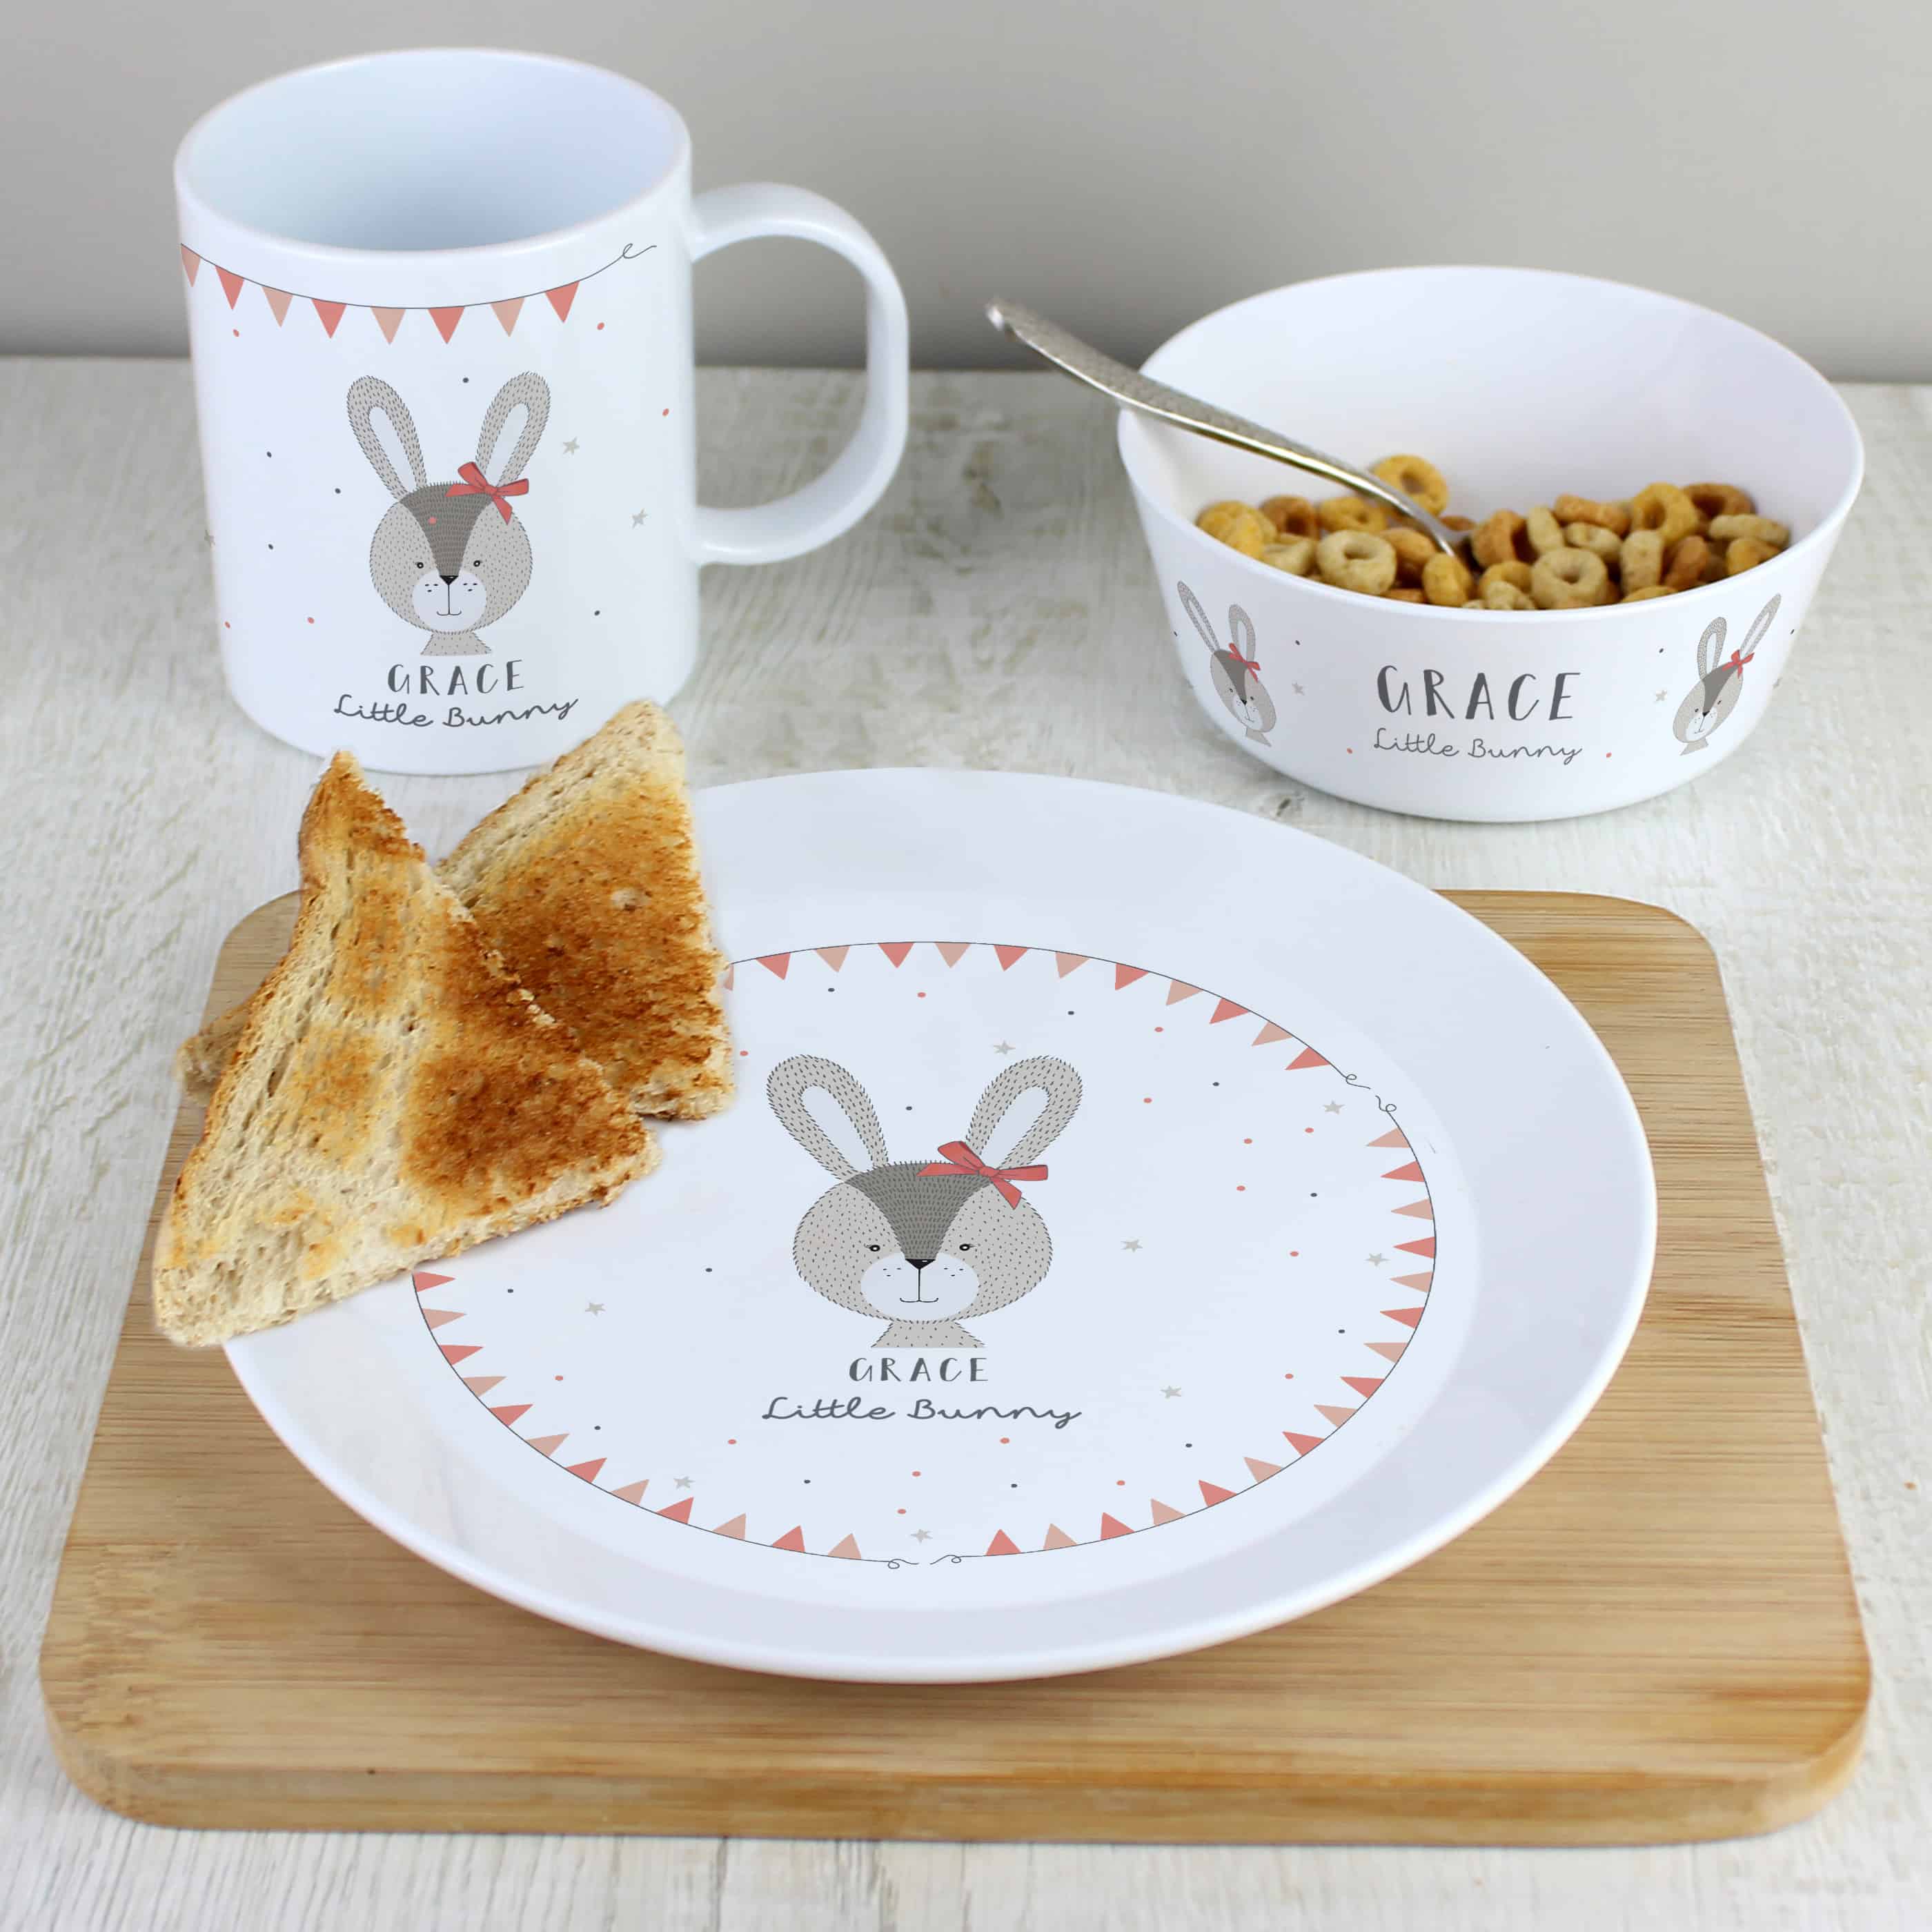 personalised breakfast set includes plate, bowl and mug